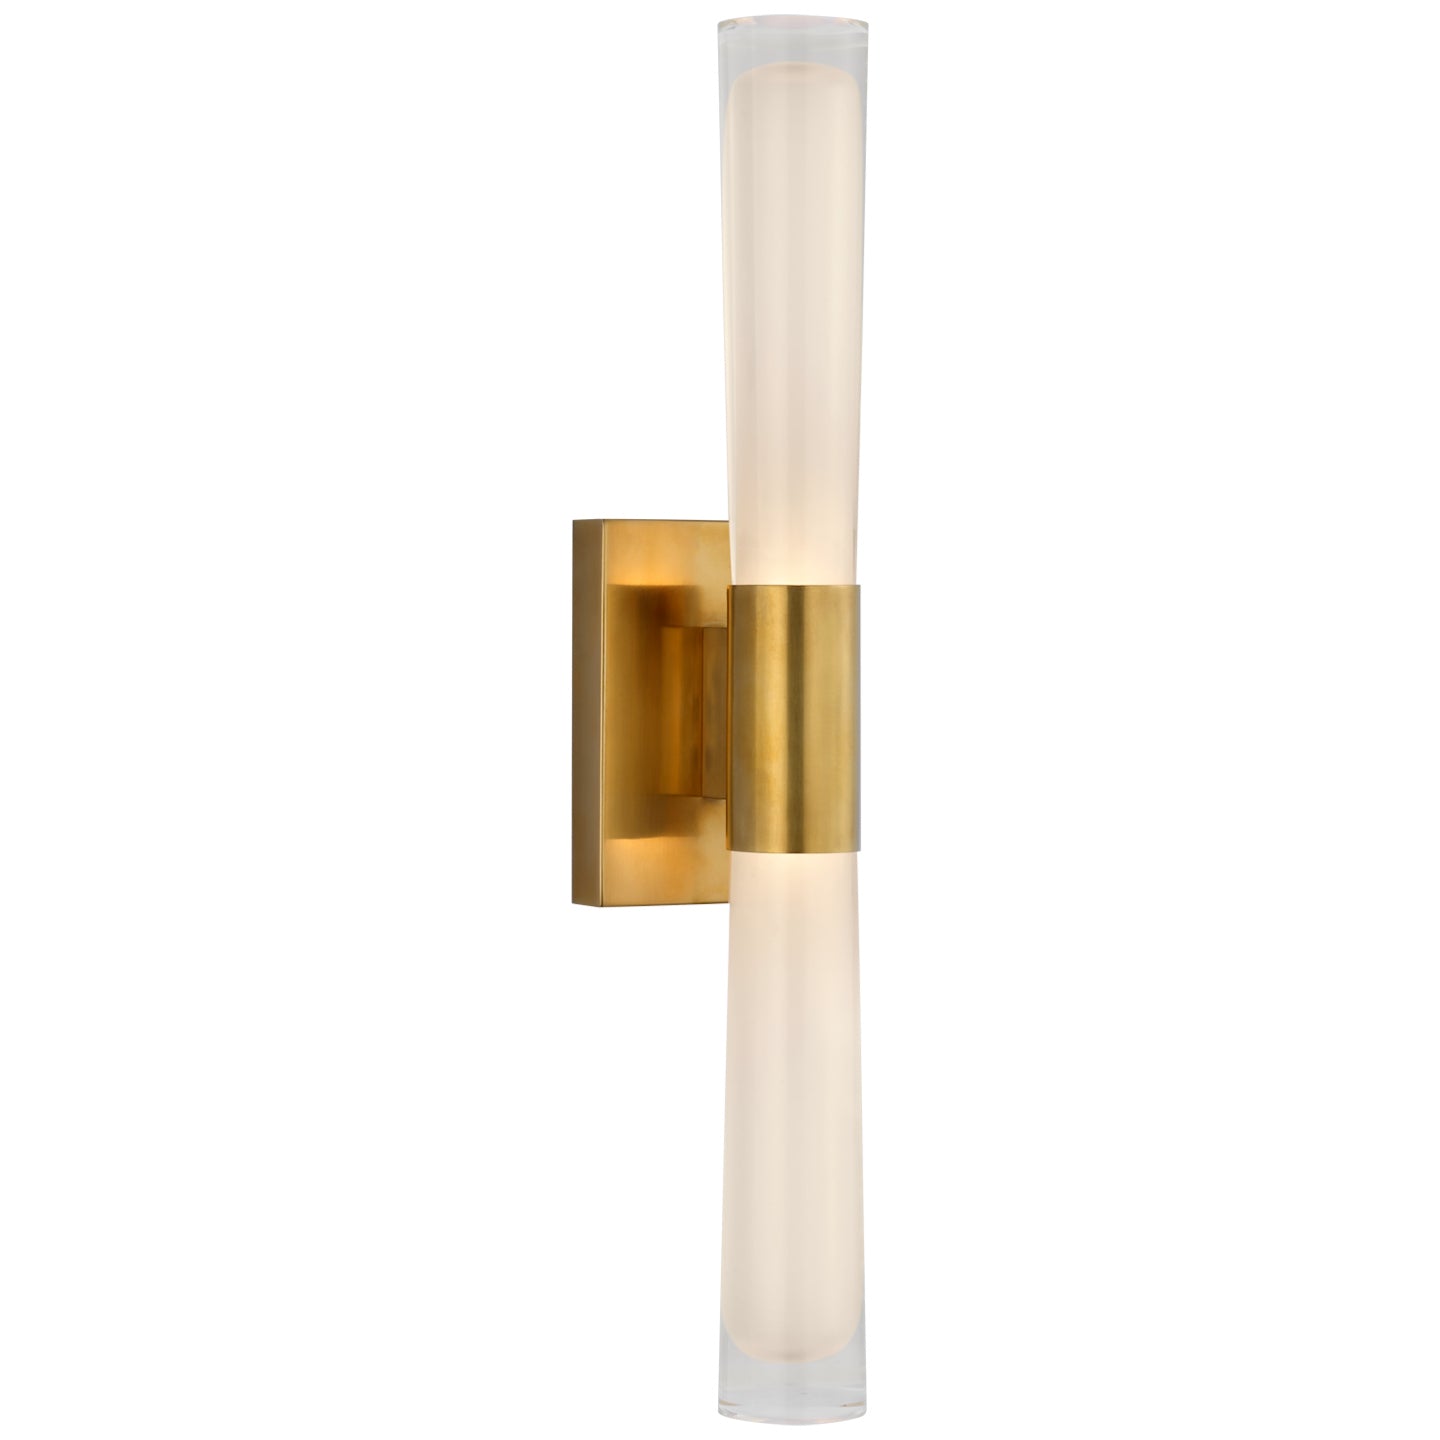 Visual Comfort Signature Canada - LED Wall Sconce - Brenta - Hand-Rubbed Antique Brass- Union Lighting Luminaires Decor